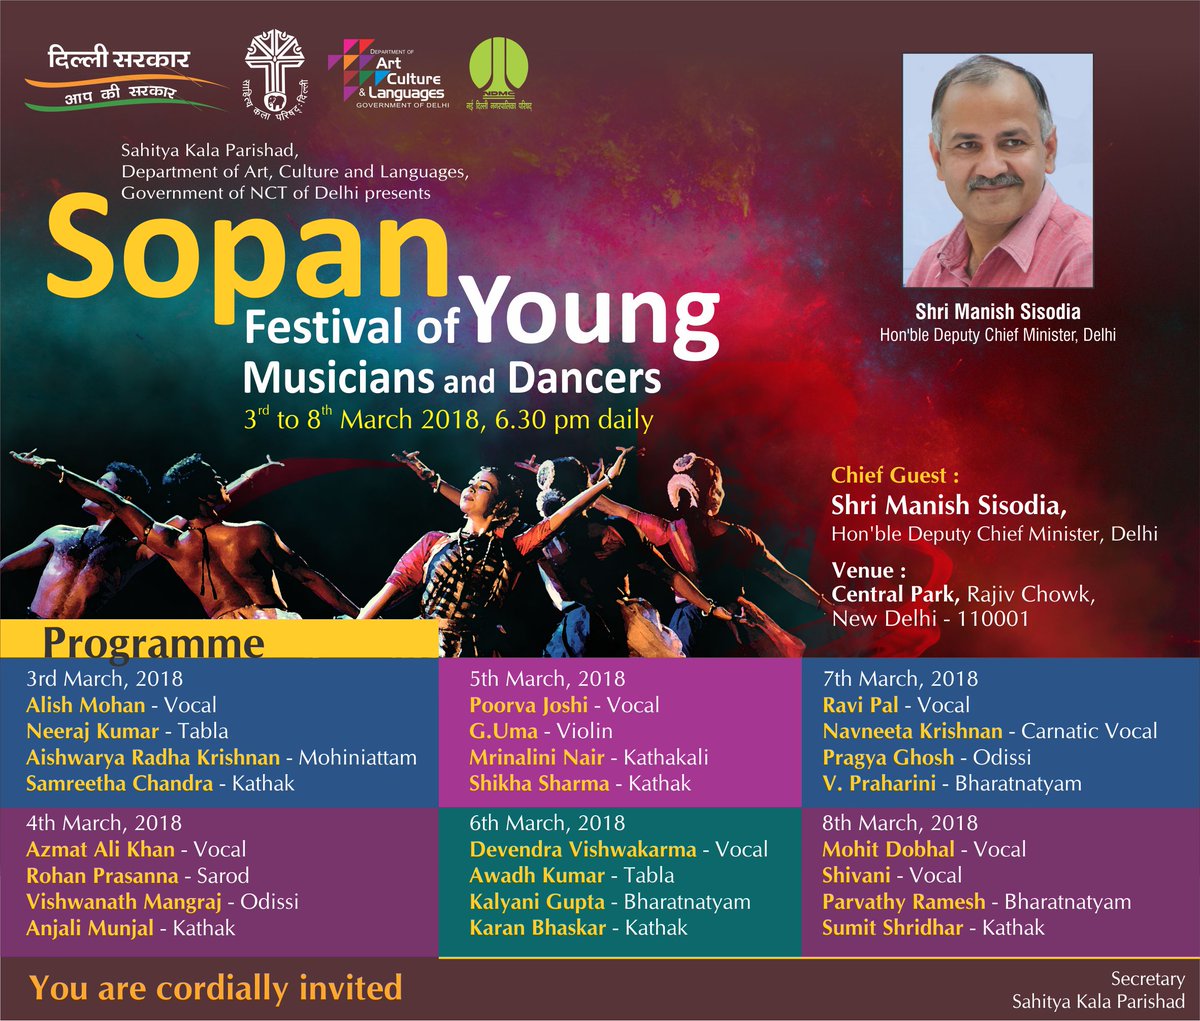 Delhi Government & SKP invite you to Sopan - a festival of spectacular performances by young classical musicians & dancers taking forward our rich cultural heritage Dates: 3-5 March Time: 6.30 PM onward Venue: Central Park, CP Entry Free! All are welcome! #Sopan2018